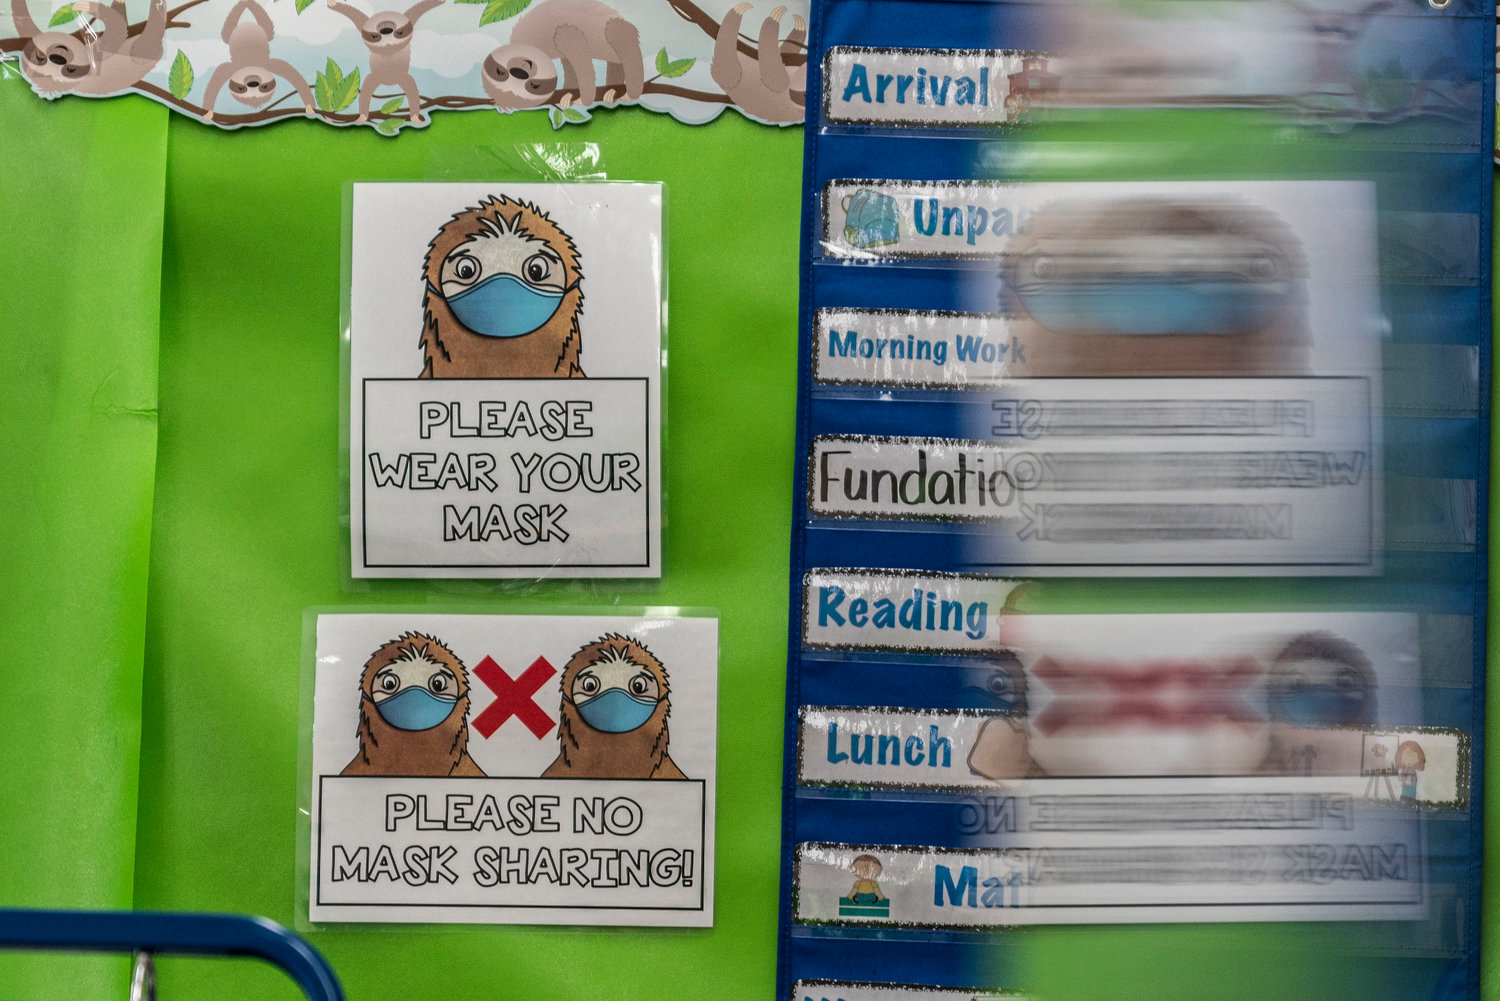 These sloth-themed mask-wearing reminders at P.S. 24 Spuyten Duyvil keep coronavirus on the mind. The majority of the city’s public schools reopened for in-person classes last week, but was heralded with a unanimous vote of no confidence from the city’s principals union.